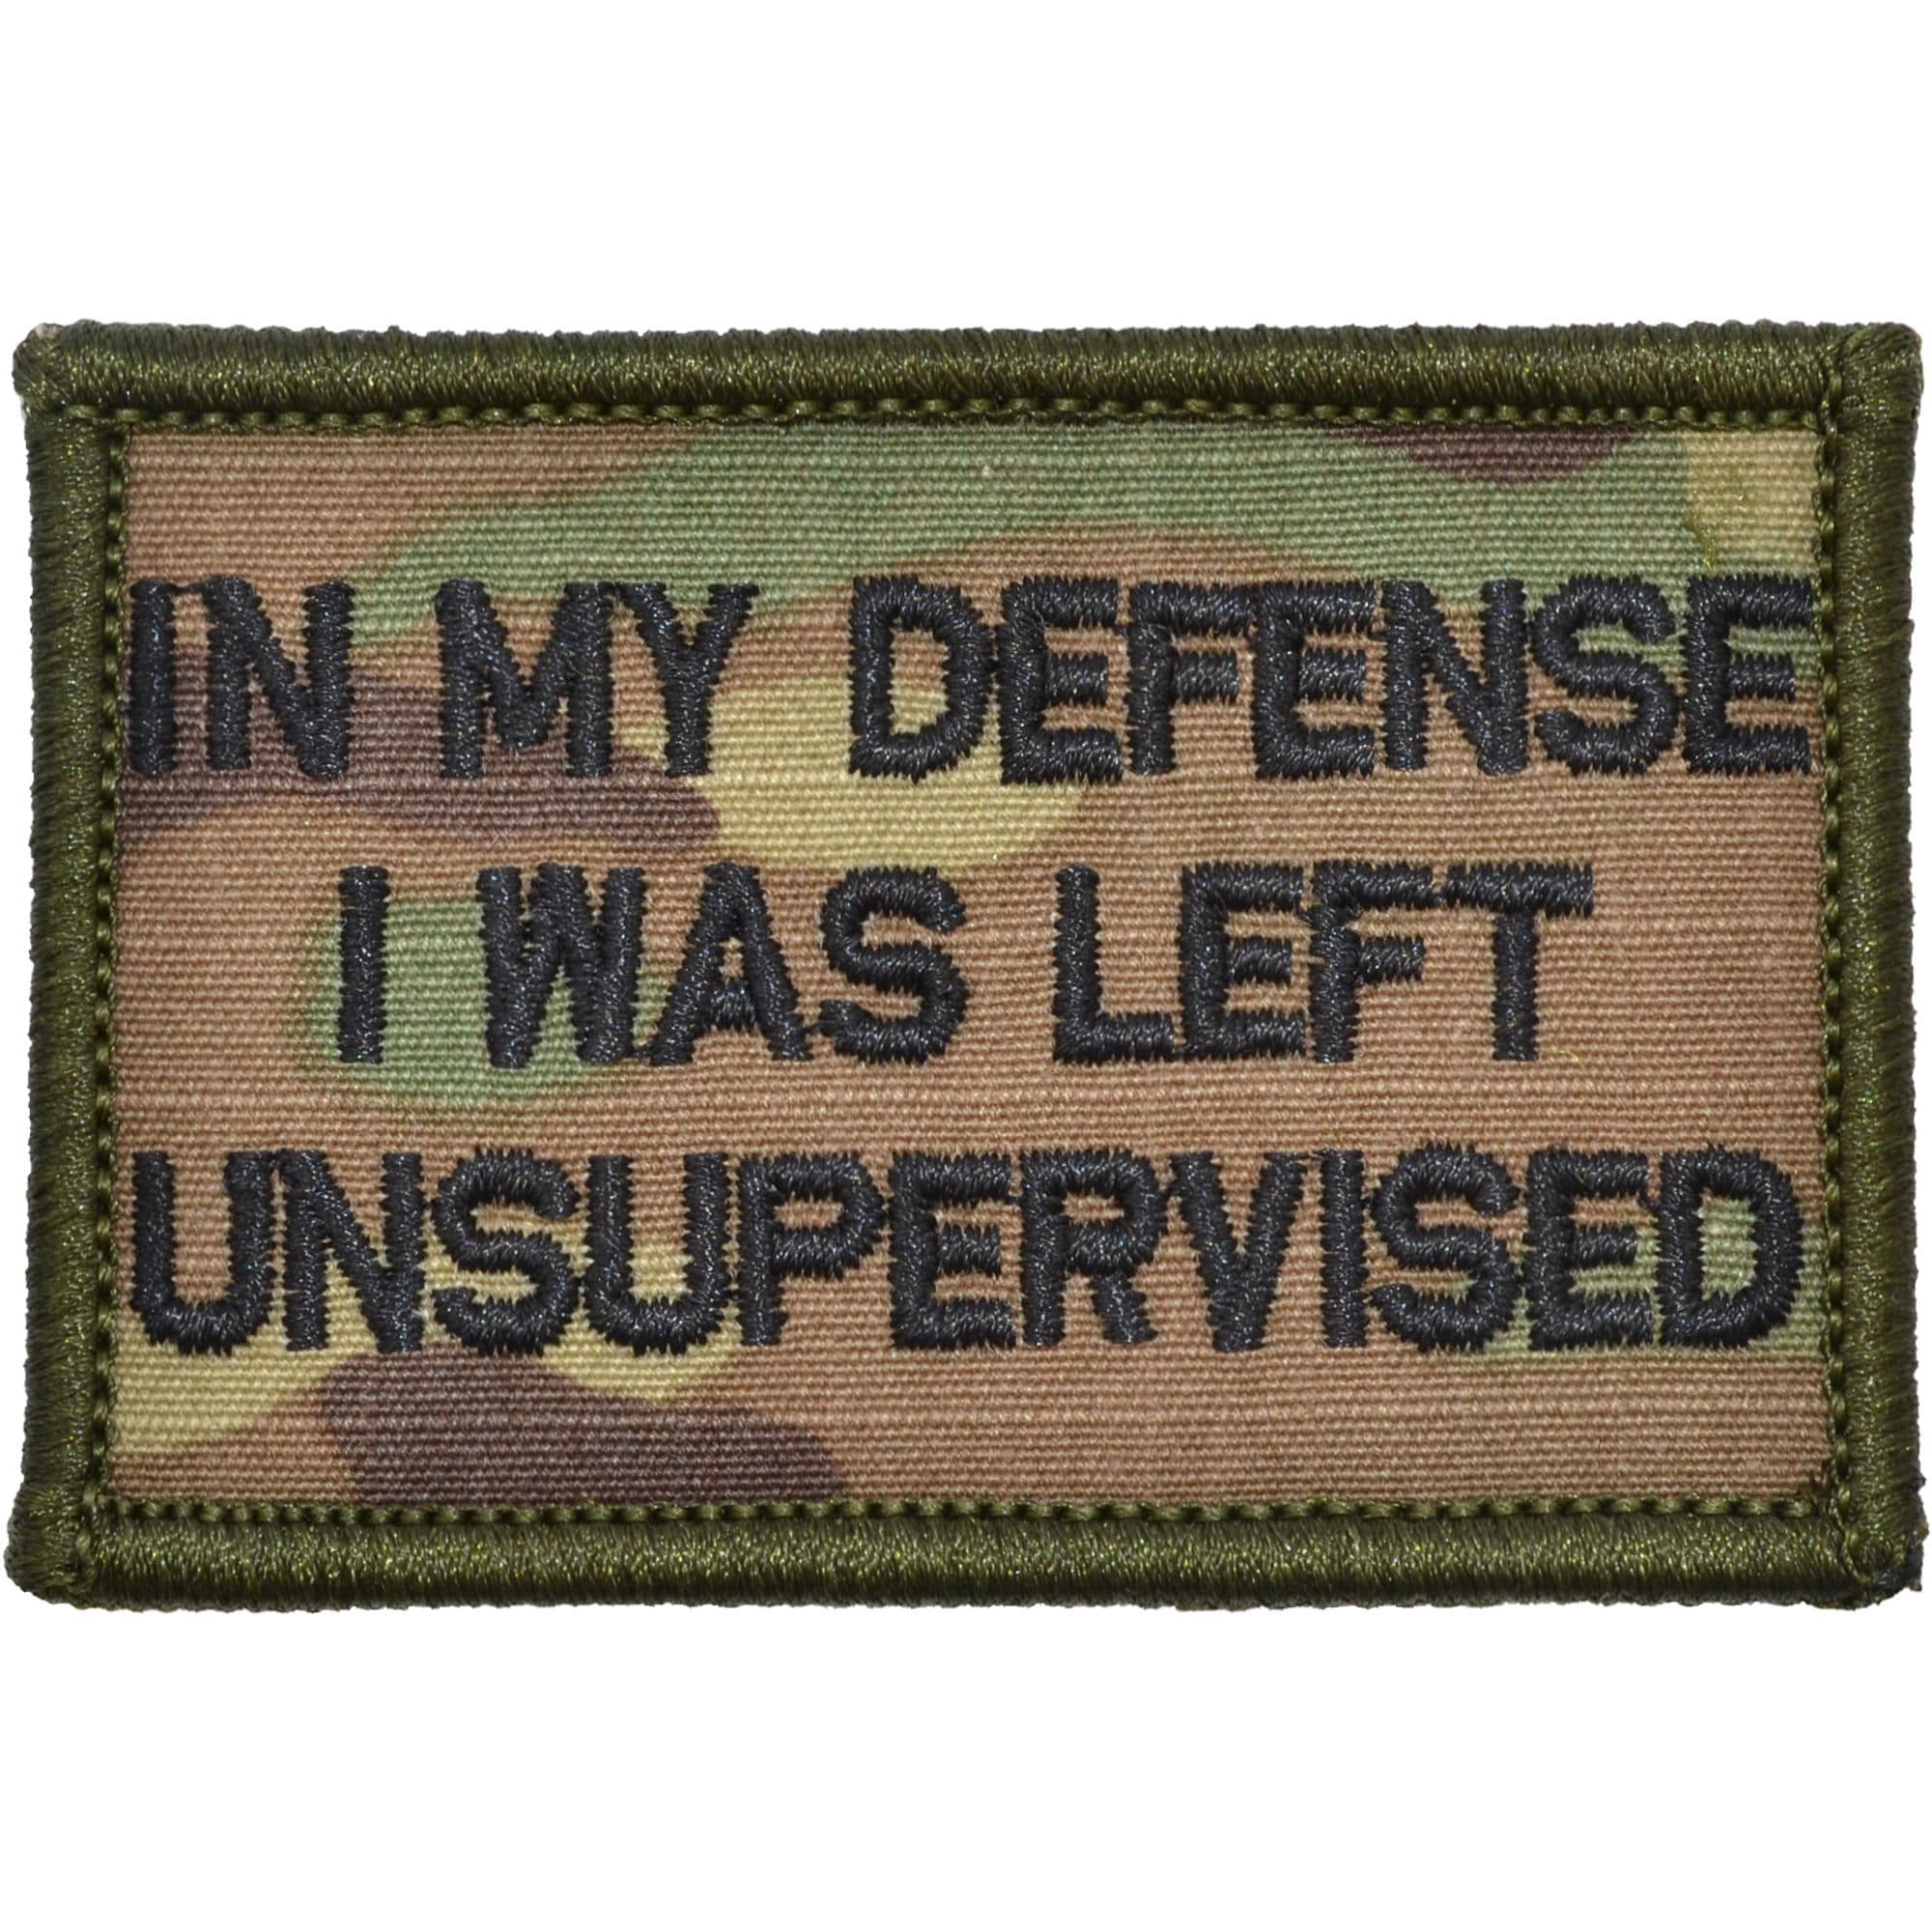 Tactical Gear Junkie Patches MultiCam In My Defense I Was Left Unsupervised - 2x3 Patch